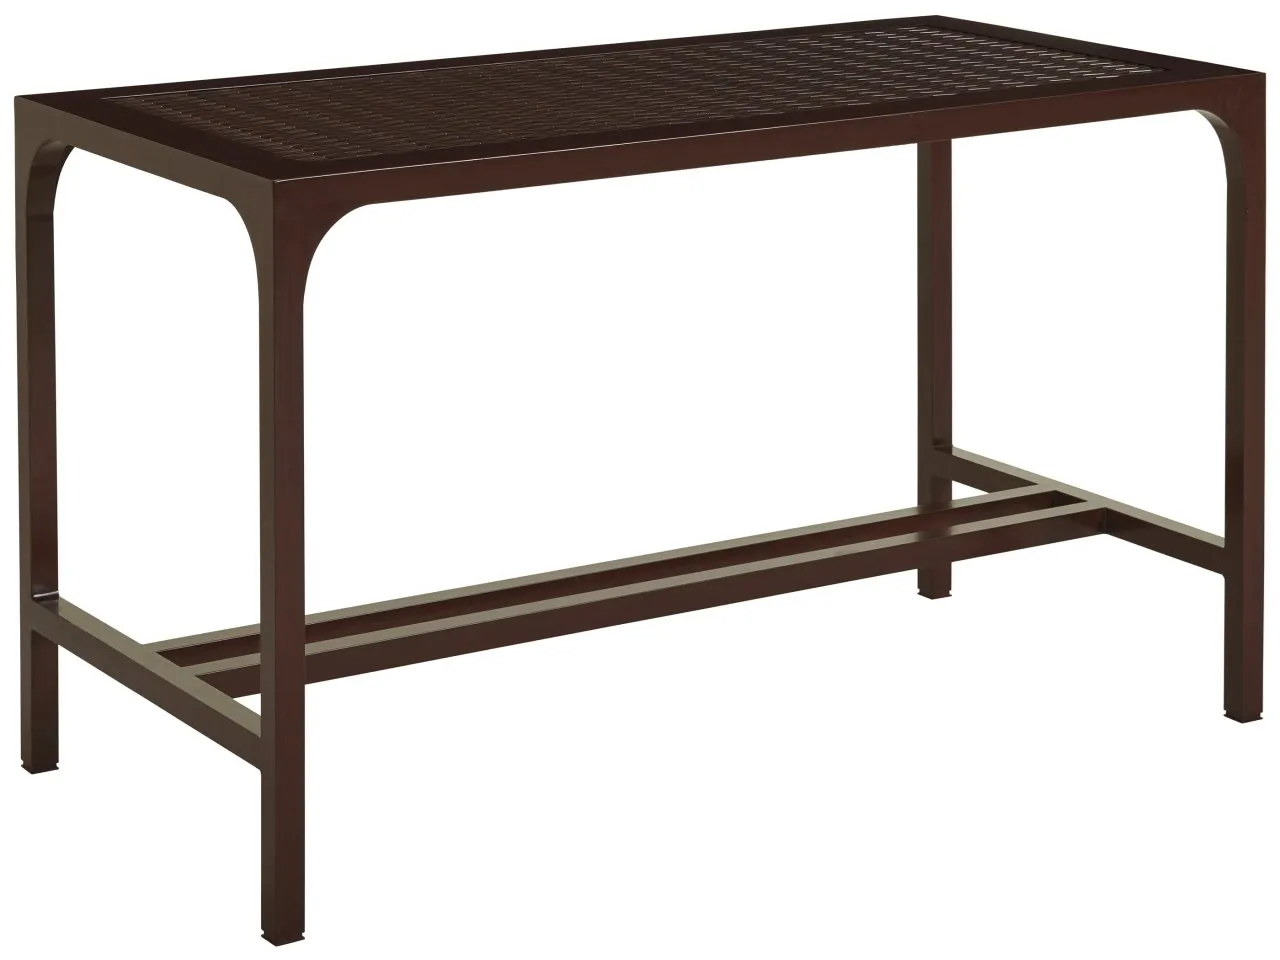 ABACO OUTDOOR HIGH/LOW BISTRO TABLE